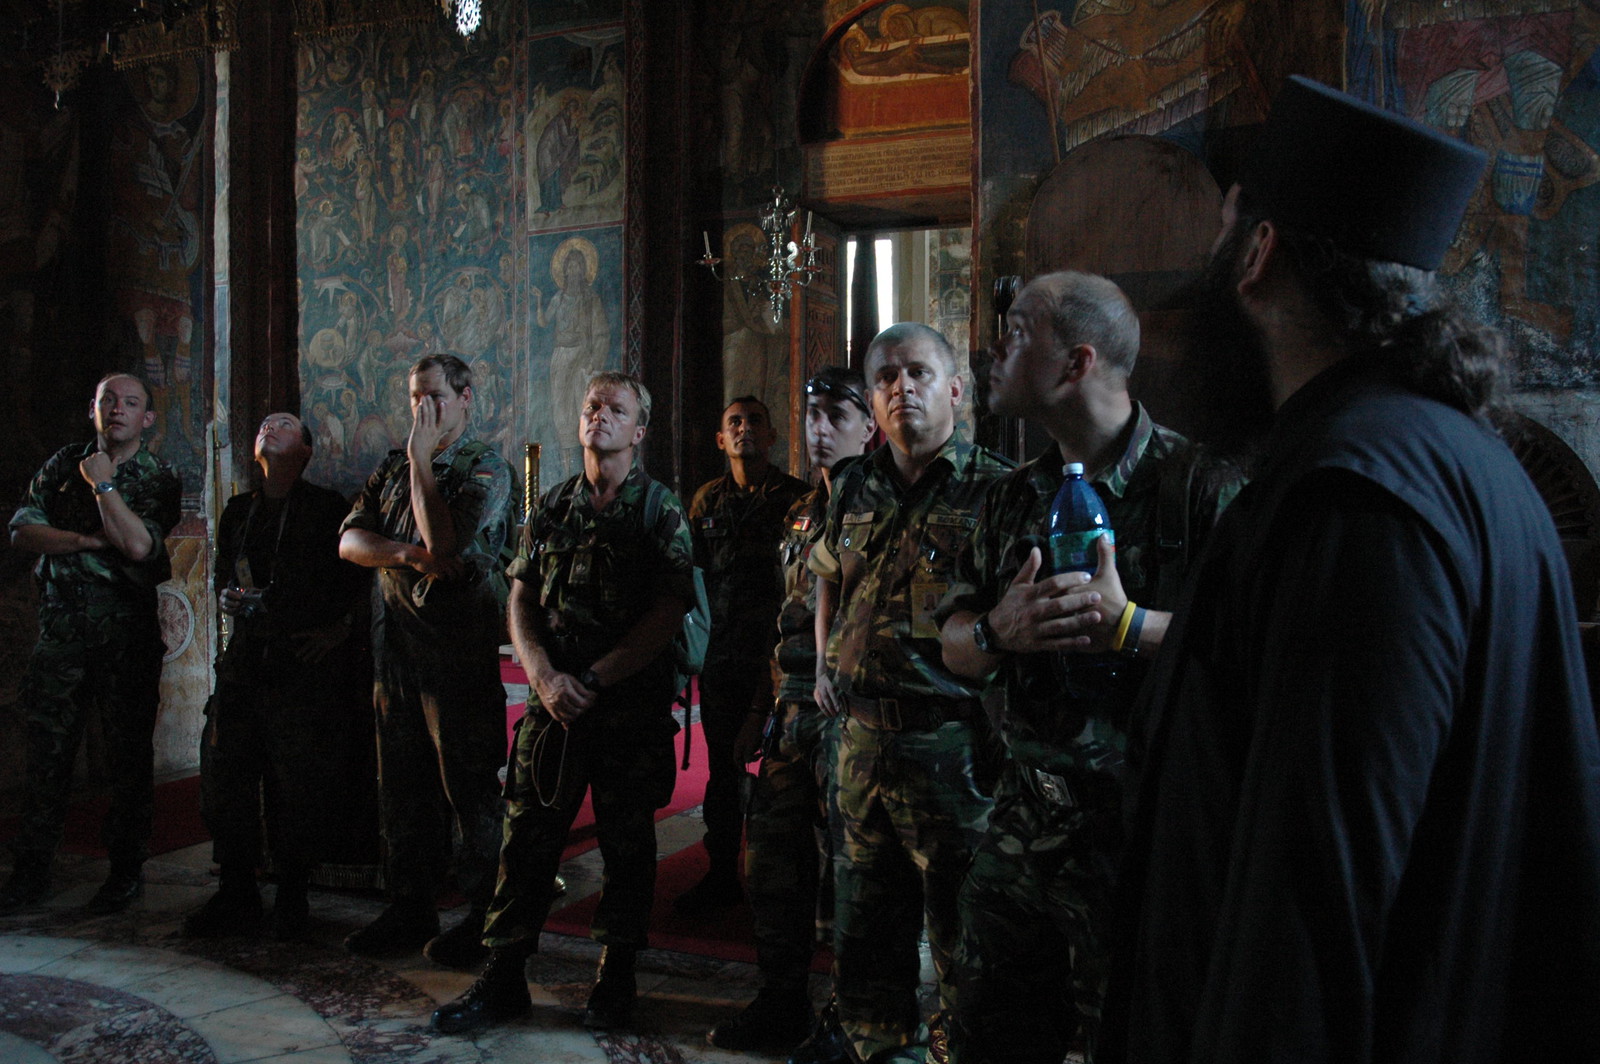 KFOR Soldiers visiting the Monastery 15